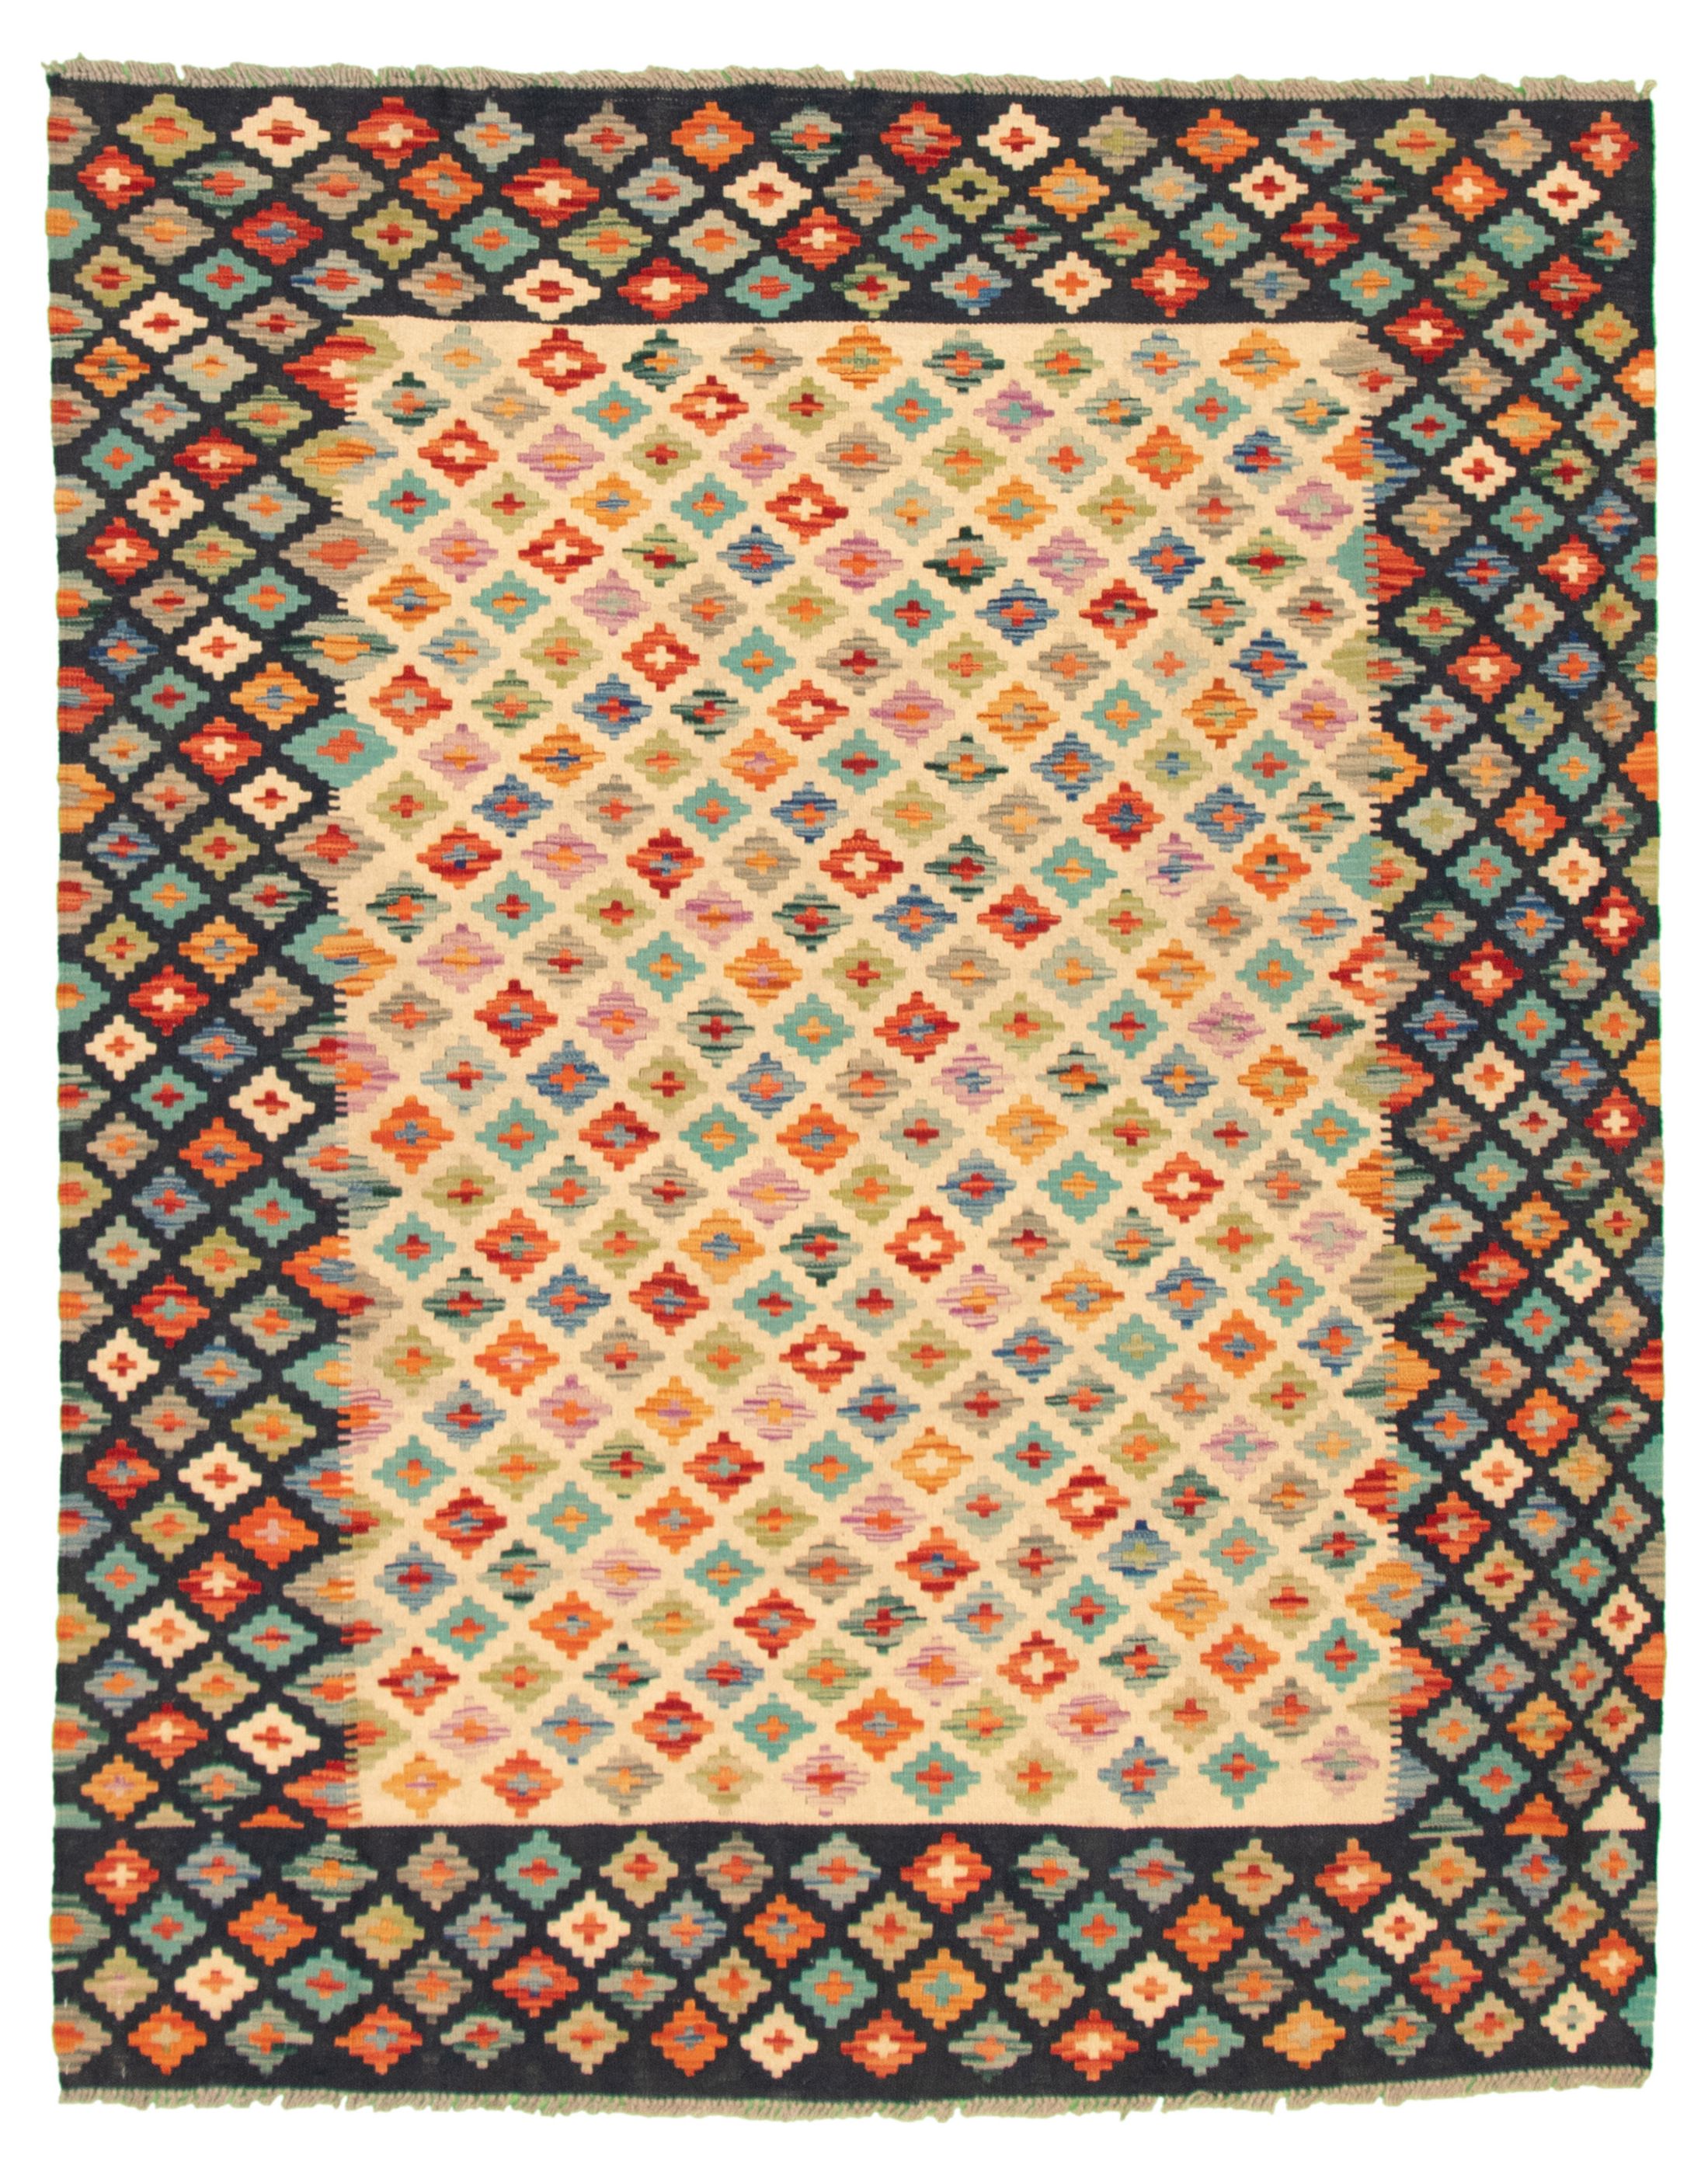 Hand woven Bold and Colorful  Cream, Dark Navy Wool Kilim 5'3" x 6'7" Size: 5'3" x 6'7"  